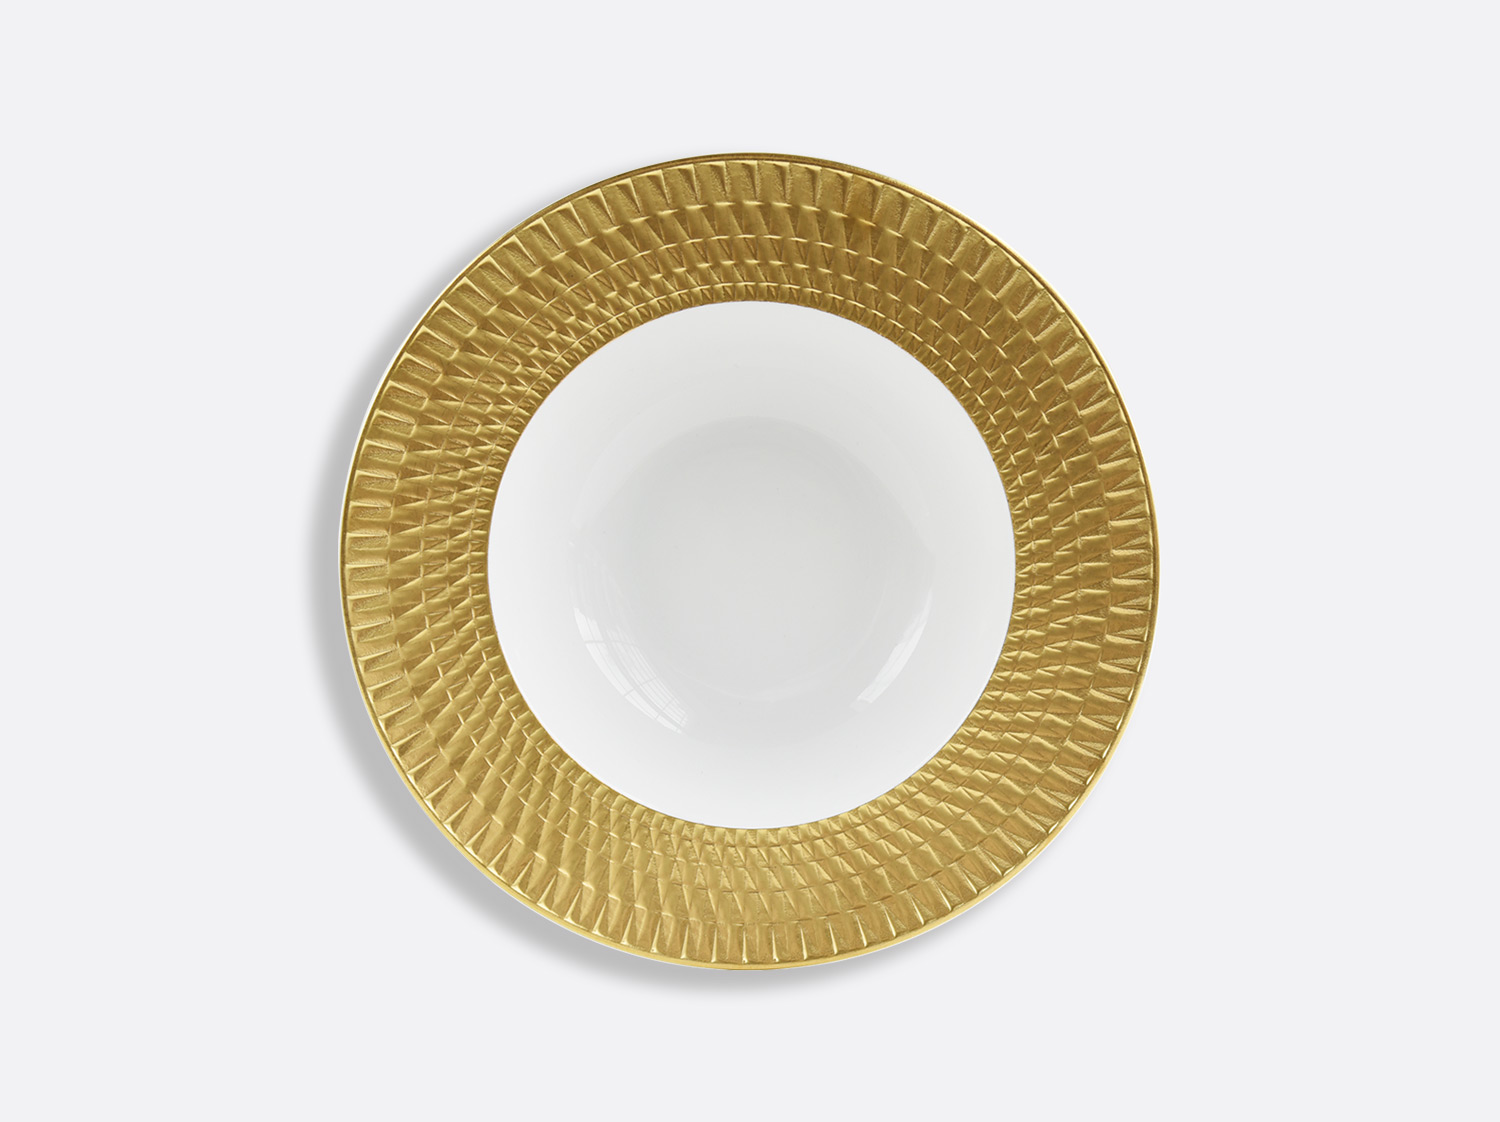 China Rim soup 9" of the collection Twist or | Bernardaud